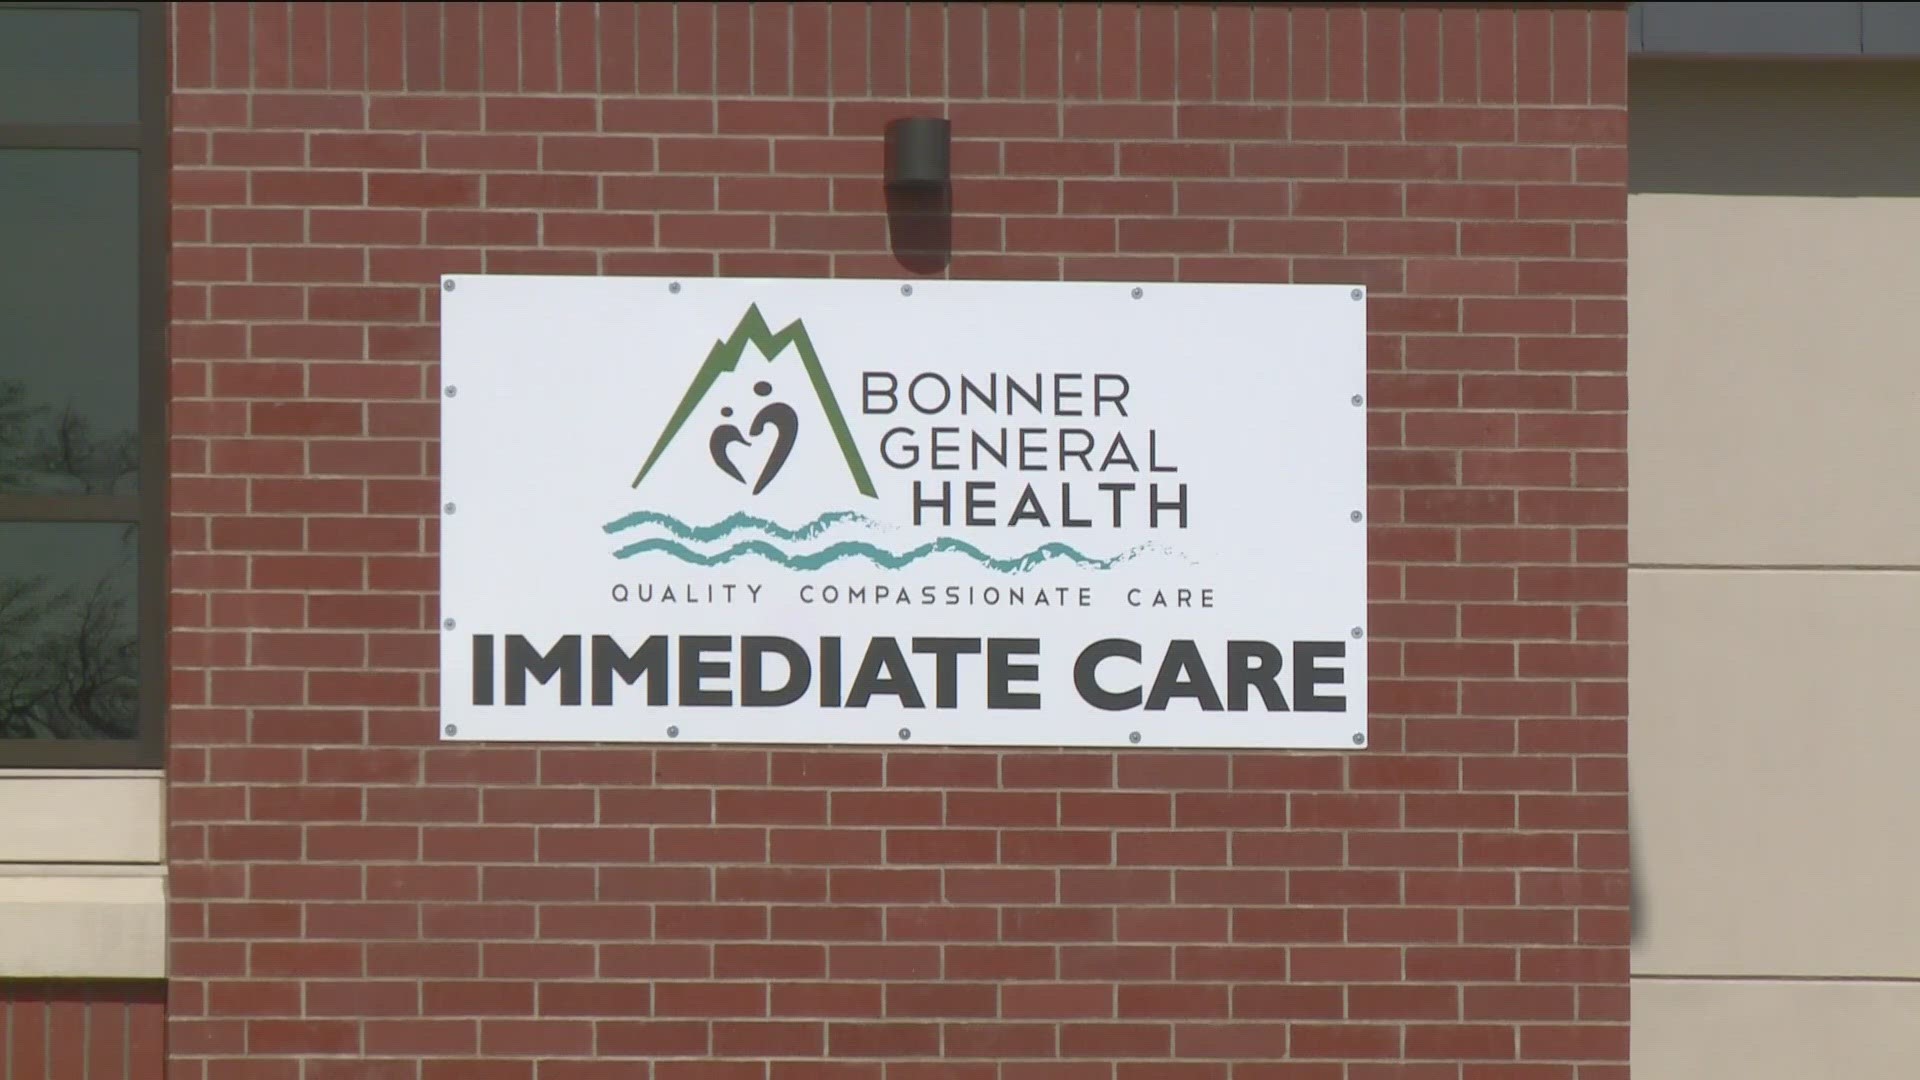 The hospital is no longer accepting OB patients and will close the department in May.